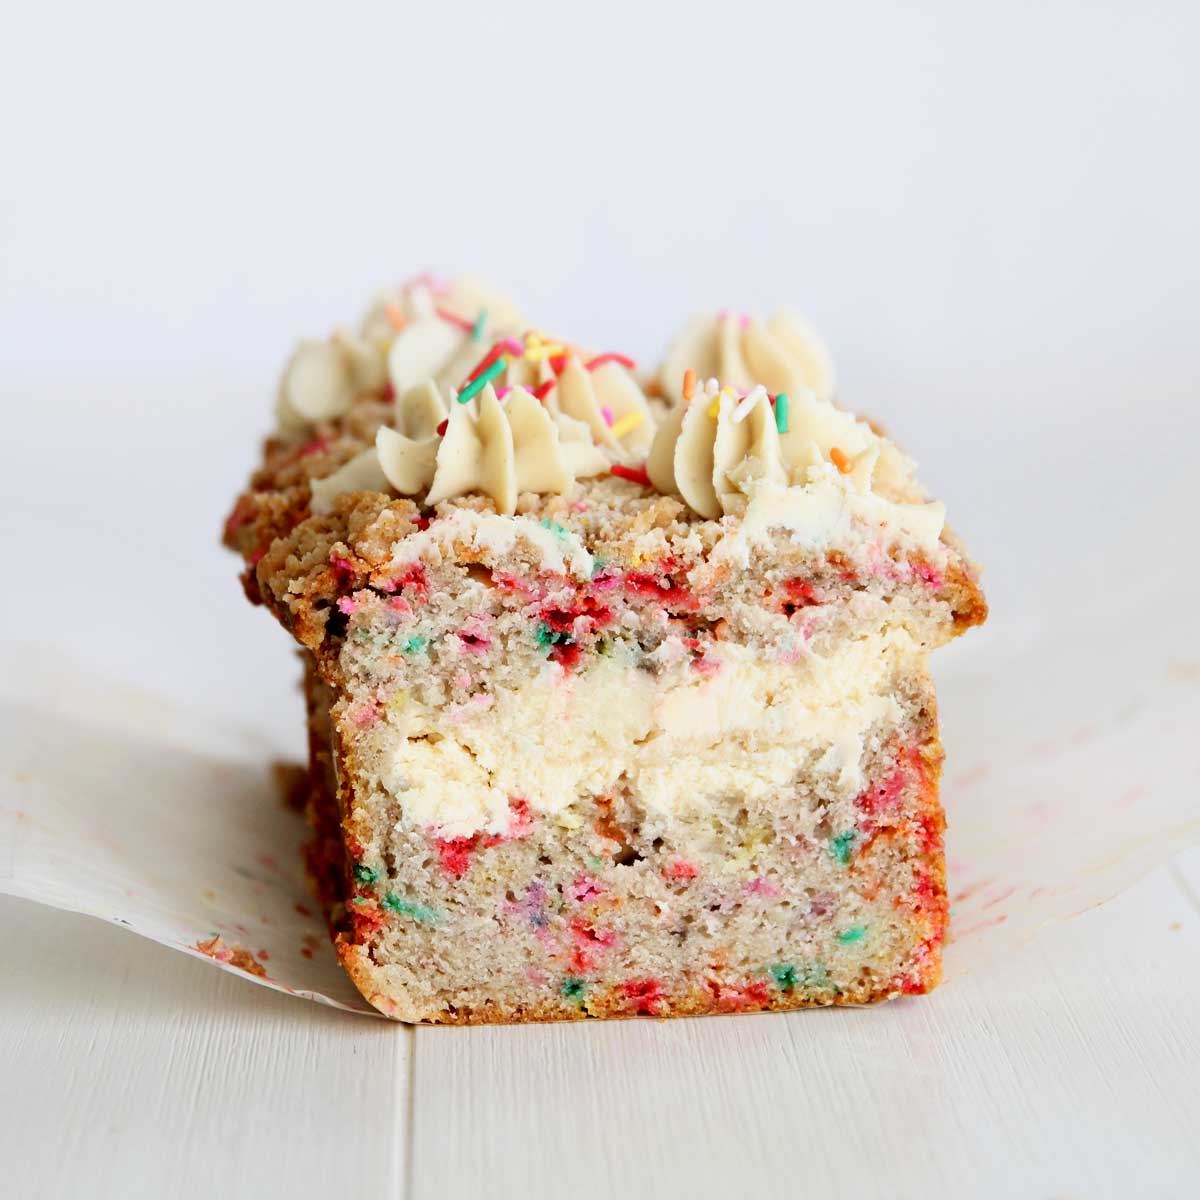 It's Your Birthday Cake Banana Bread with Cream Cheese Filling (No Eggs, No Butter) - Birthday Cake Banana Bread